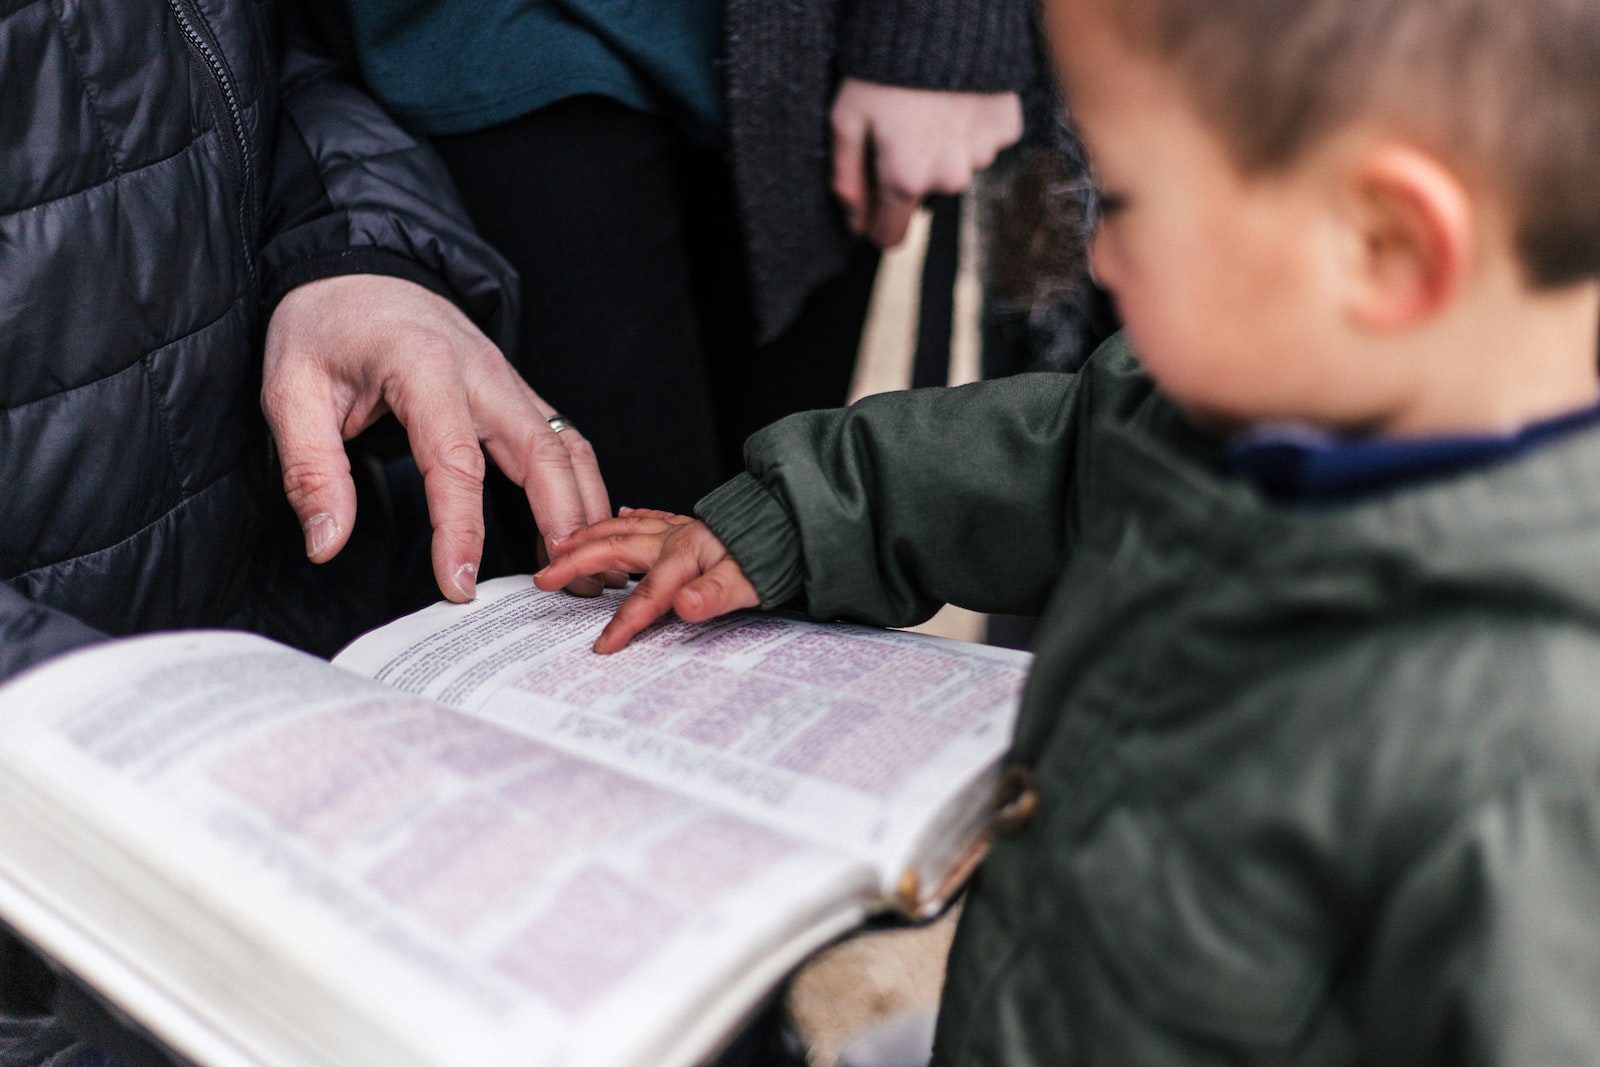 Small child touching and Bible as parent looks on